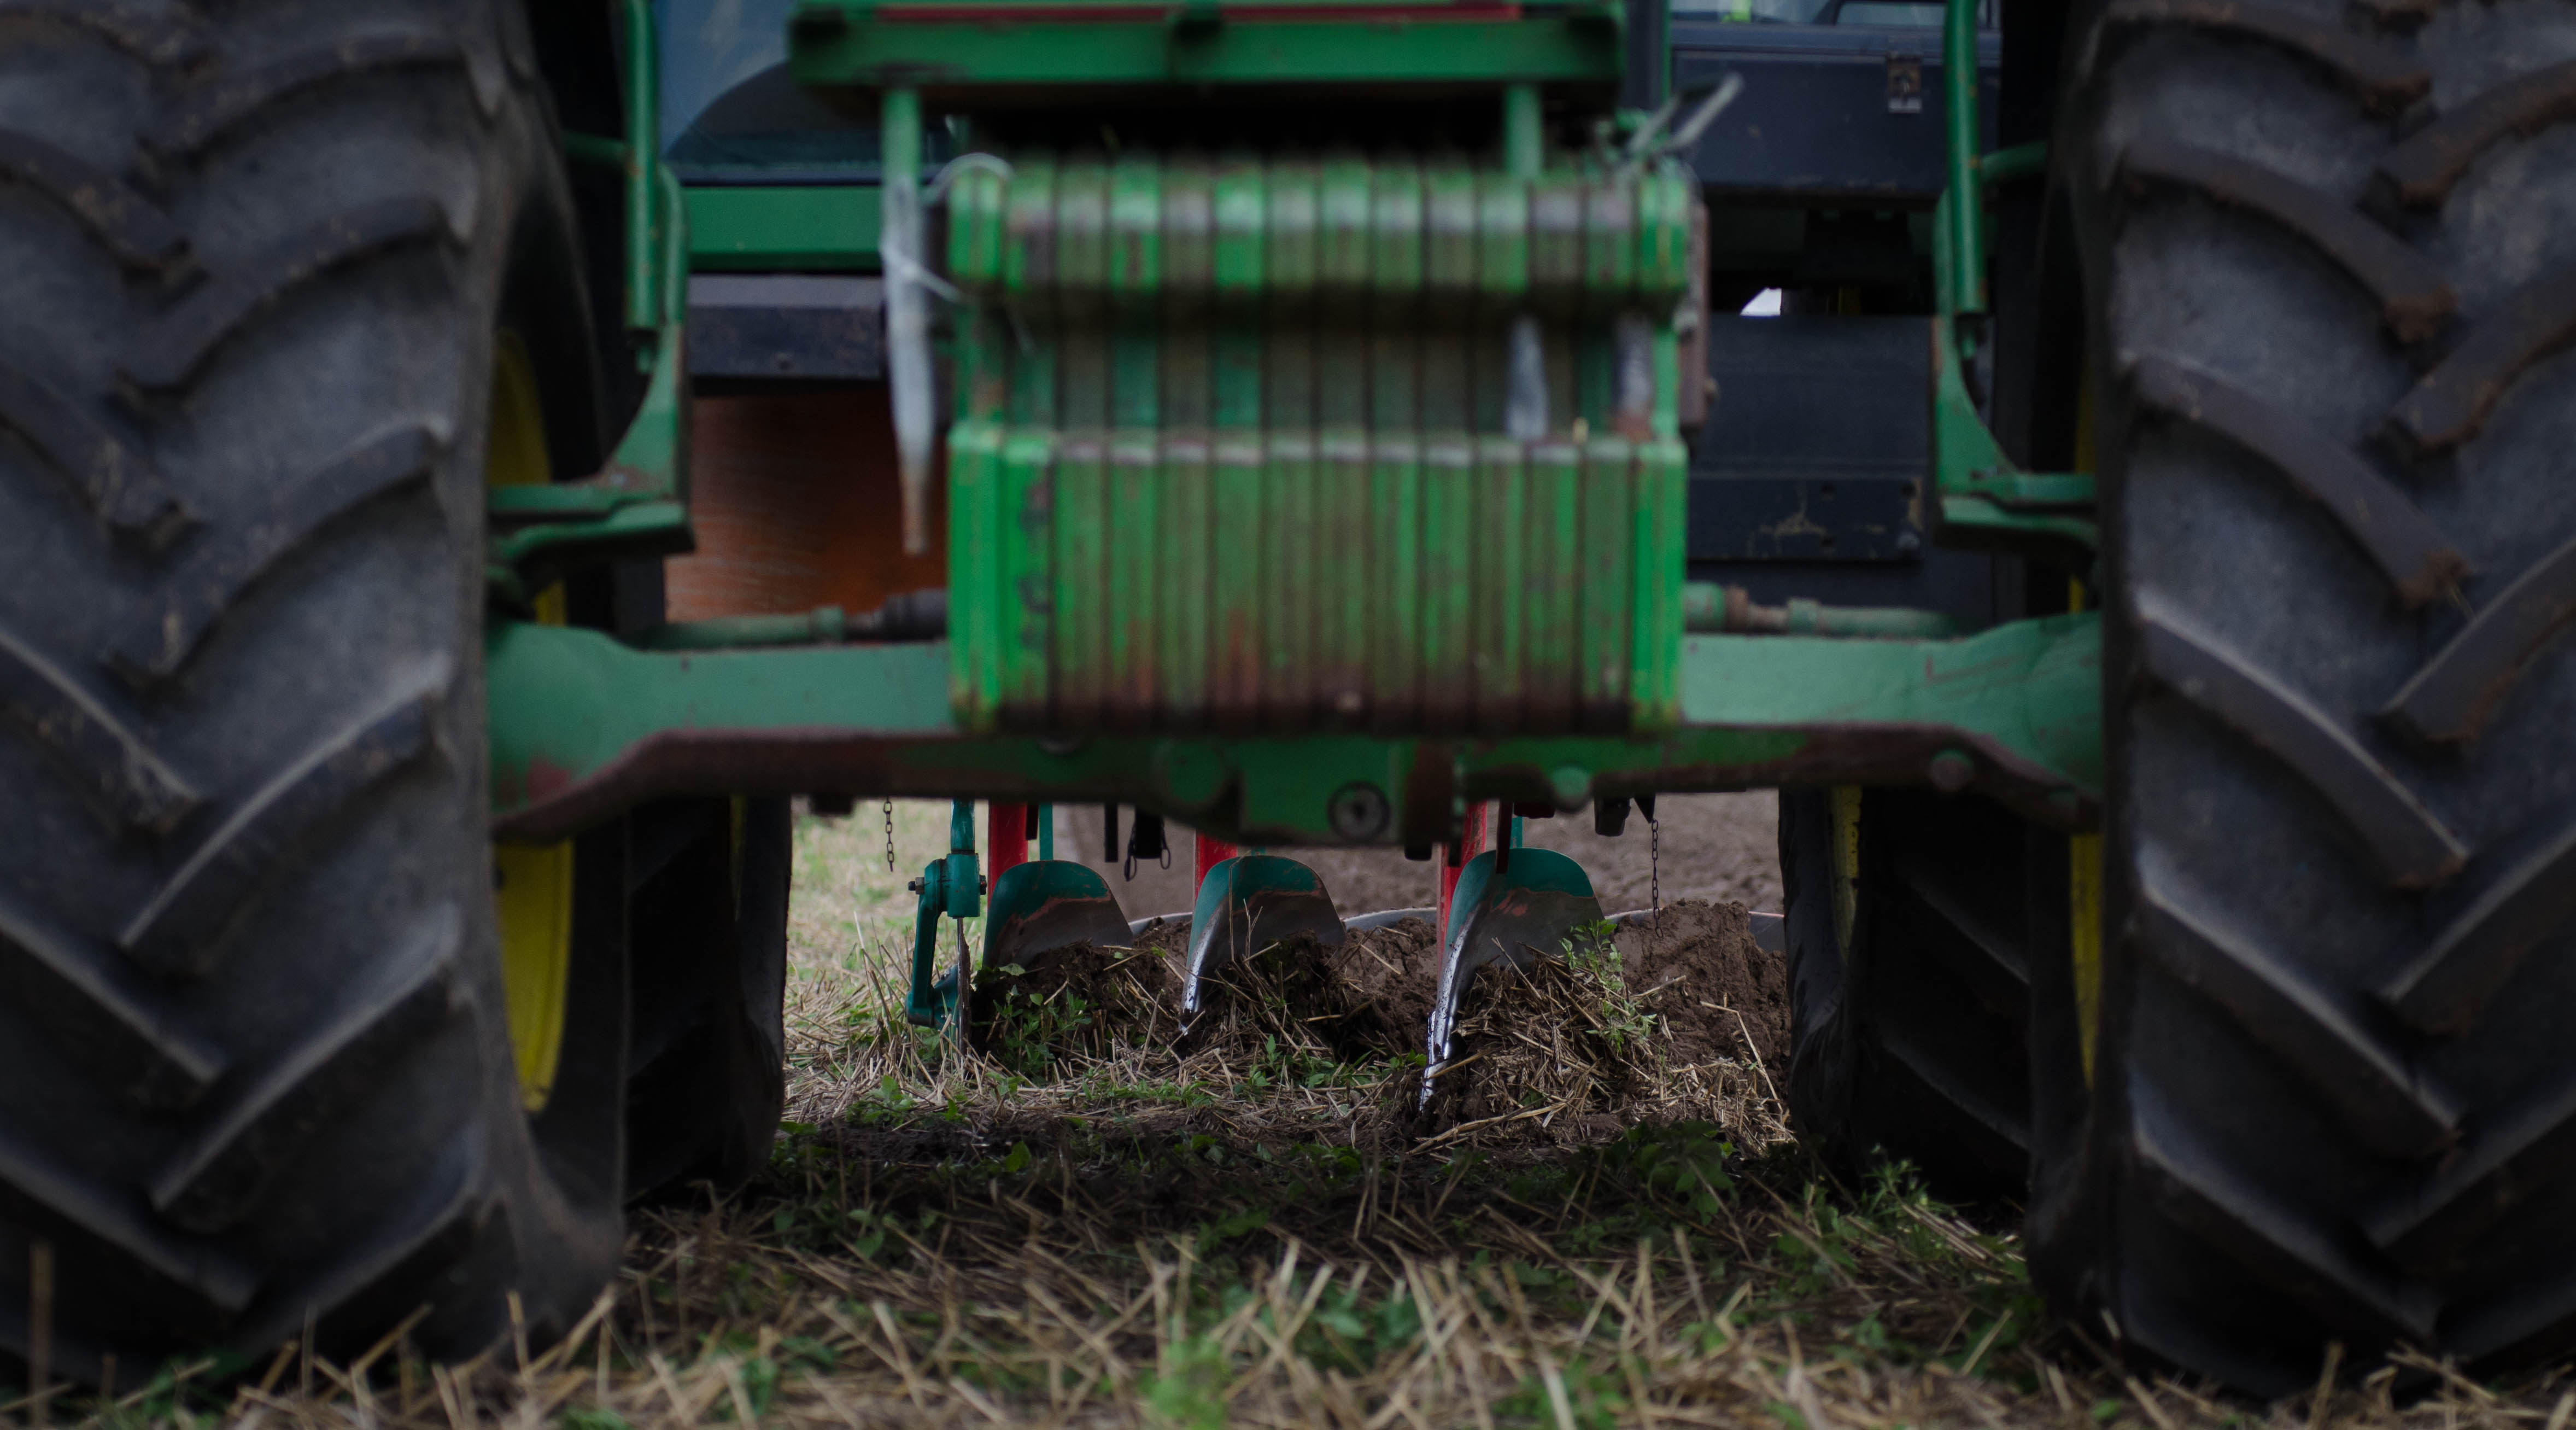 Marcel Berger at the European Reversible Ploughing Championship 2014